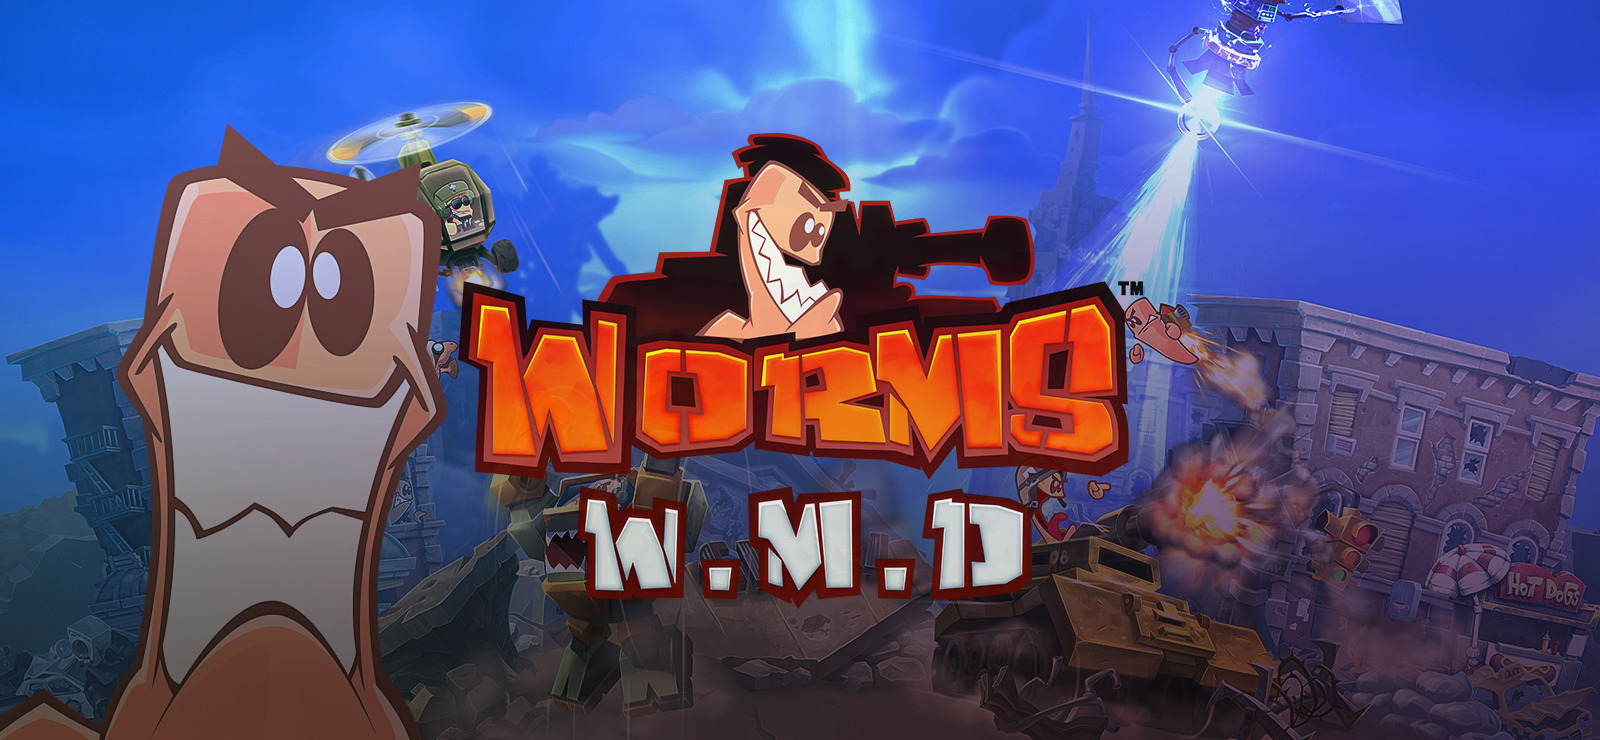 worms w.m.d rating